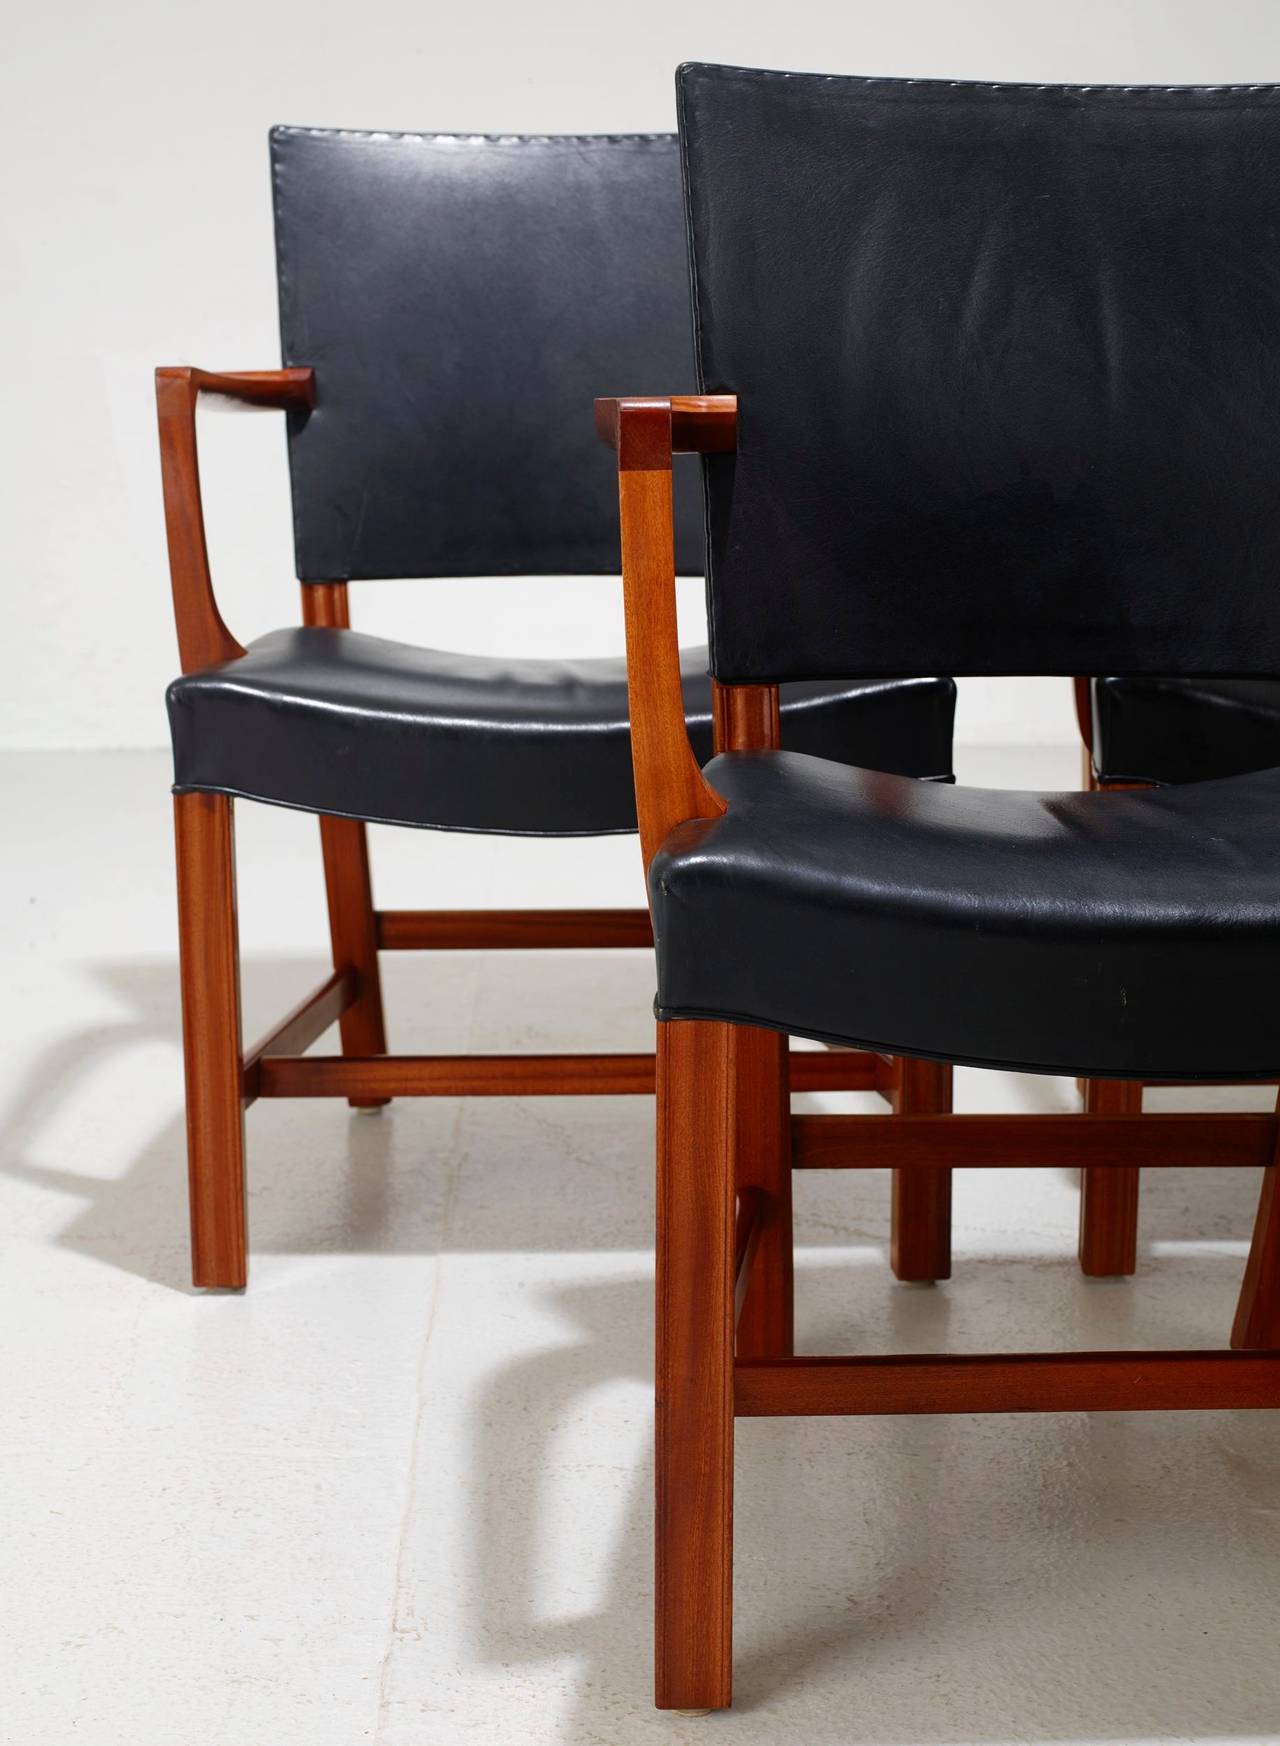 6 Kaare Klint armchairs, mahogany wood, upholstered in black leather, label marked KK Rud Rasmussen SNEDKERIER 36621. The chair was designed for the Industrial Art Museum's lecture hall in Copenhagen in 1927.
In 1930, Kaare Klint added armrests to